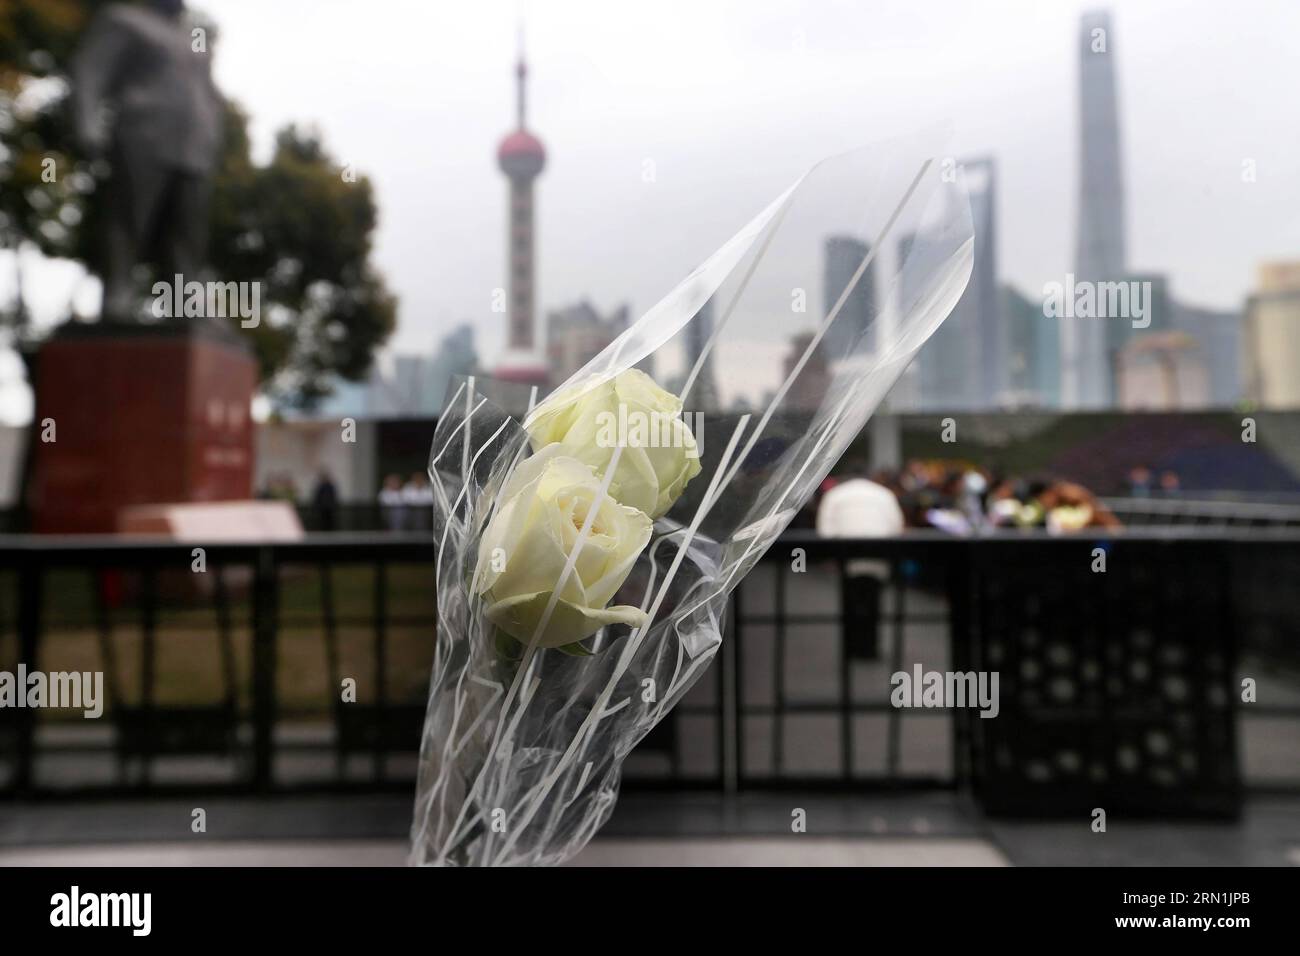 AKTUELLES ZEITGESCHEHEN Gedenken an die Opfer der Massenpanik in Shanghai (150106) -- SHANGHAI, Jan. 6, 2015 -- Flowers are presented to mourn for stampede victims at the Bund in Shanghai, east China, Jan. 6, 2015, seven days after the tragedy. ) (wyo) CHINA-SHANGHAI-STAMPEDE-MOURNING (CN) DingxTing PUBLICATIONxNOTxINxCHN   News Current events Remembrance to the Victims the Mass panic in Shanghai  Shanghai Jan 6 2015 Flowers are presented to Morne for Stampede Victims AT The Confederation in Shanghai East China Jan 6 2015 Seven Days After The Tragedy  China Shanghai Stampede Mourning CN  PUBLI Stock Photo